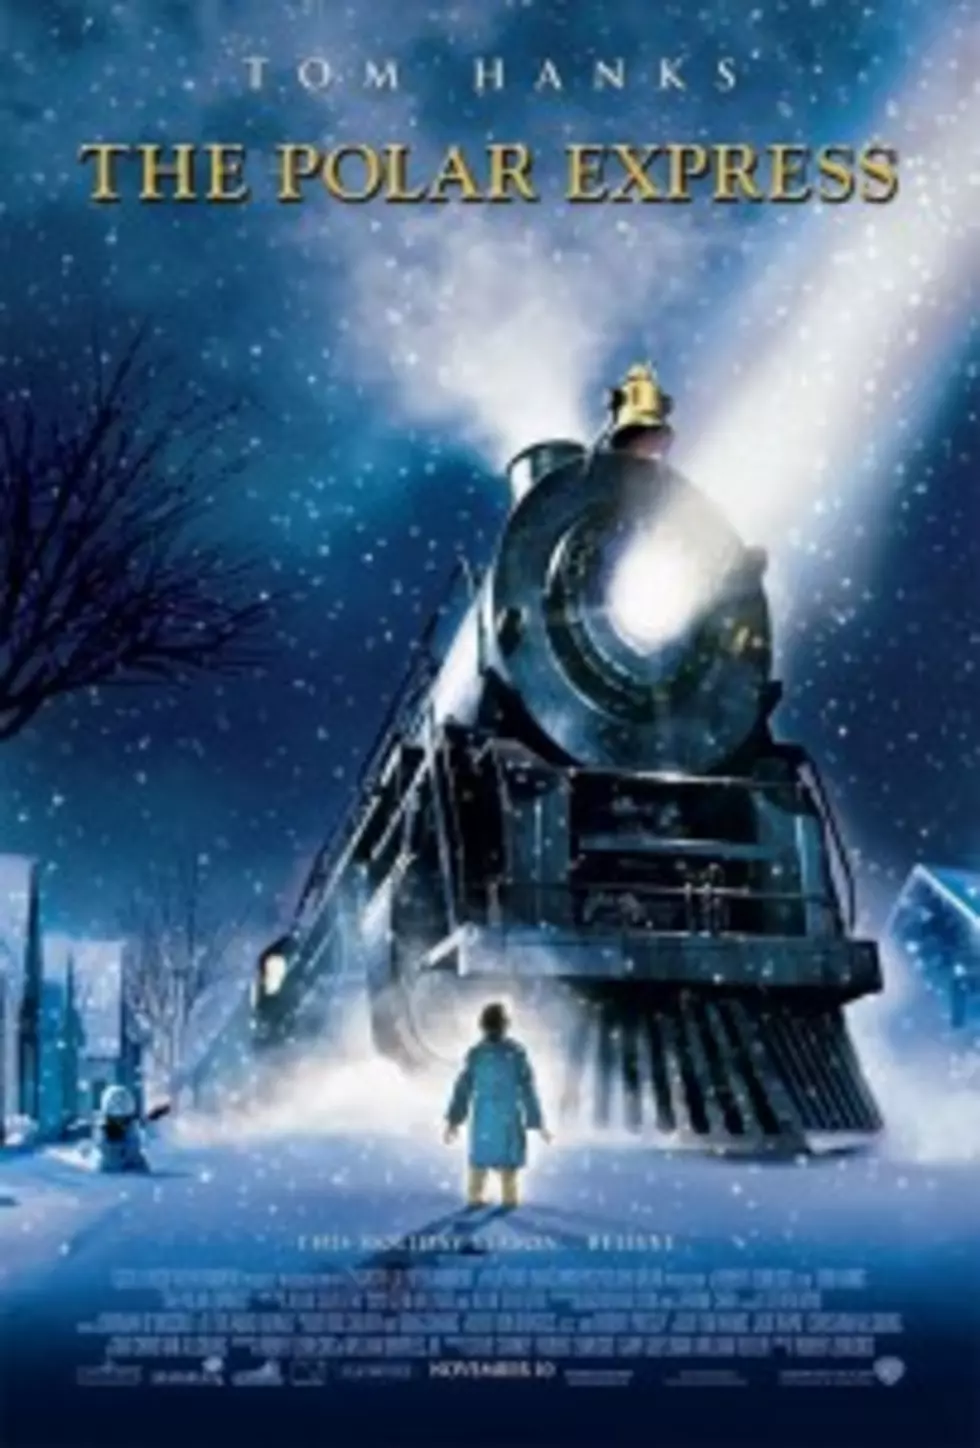 The Big Brothers Big Sisters Holiday Express Is Coming To Centennial Middle School